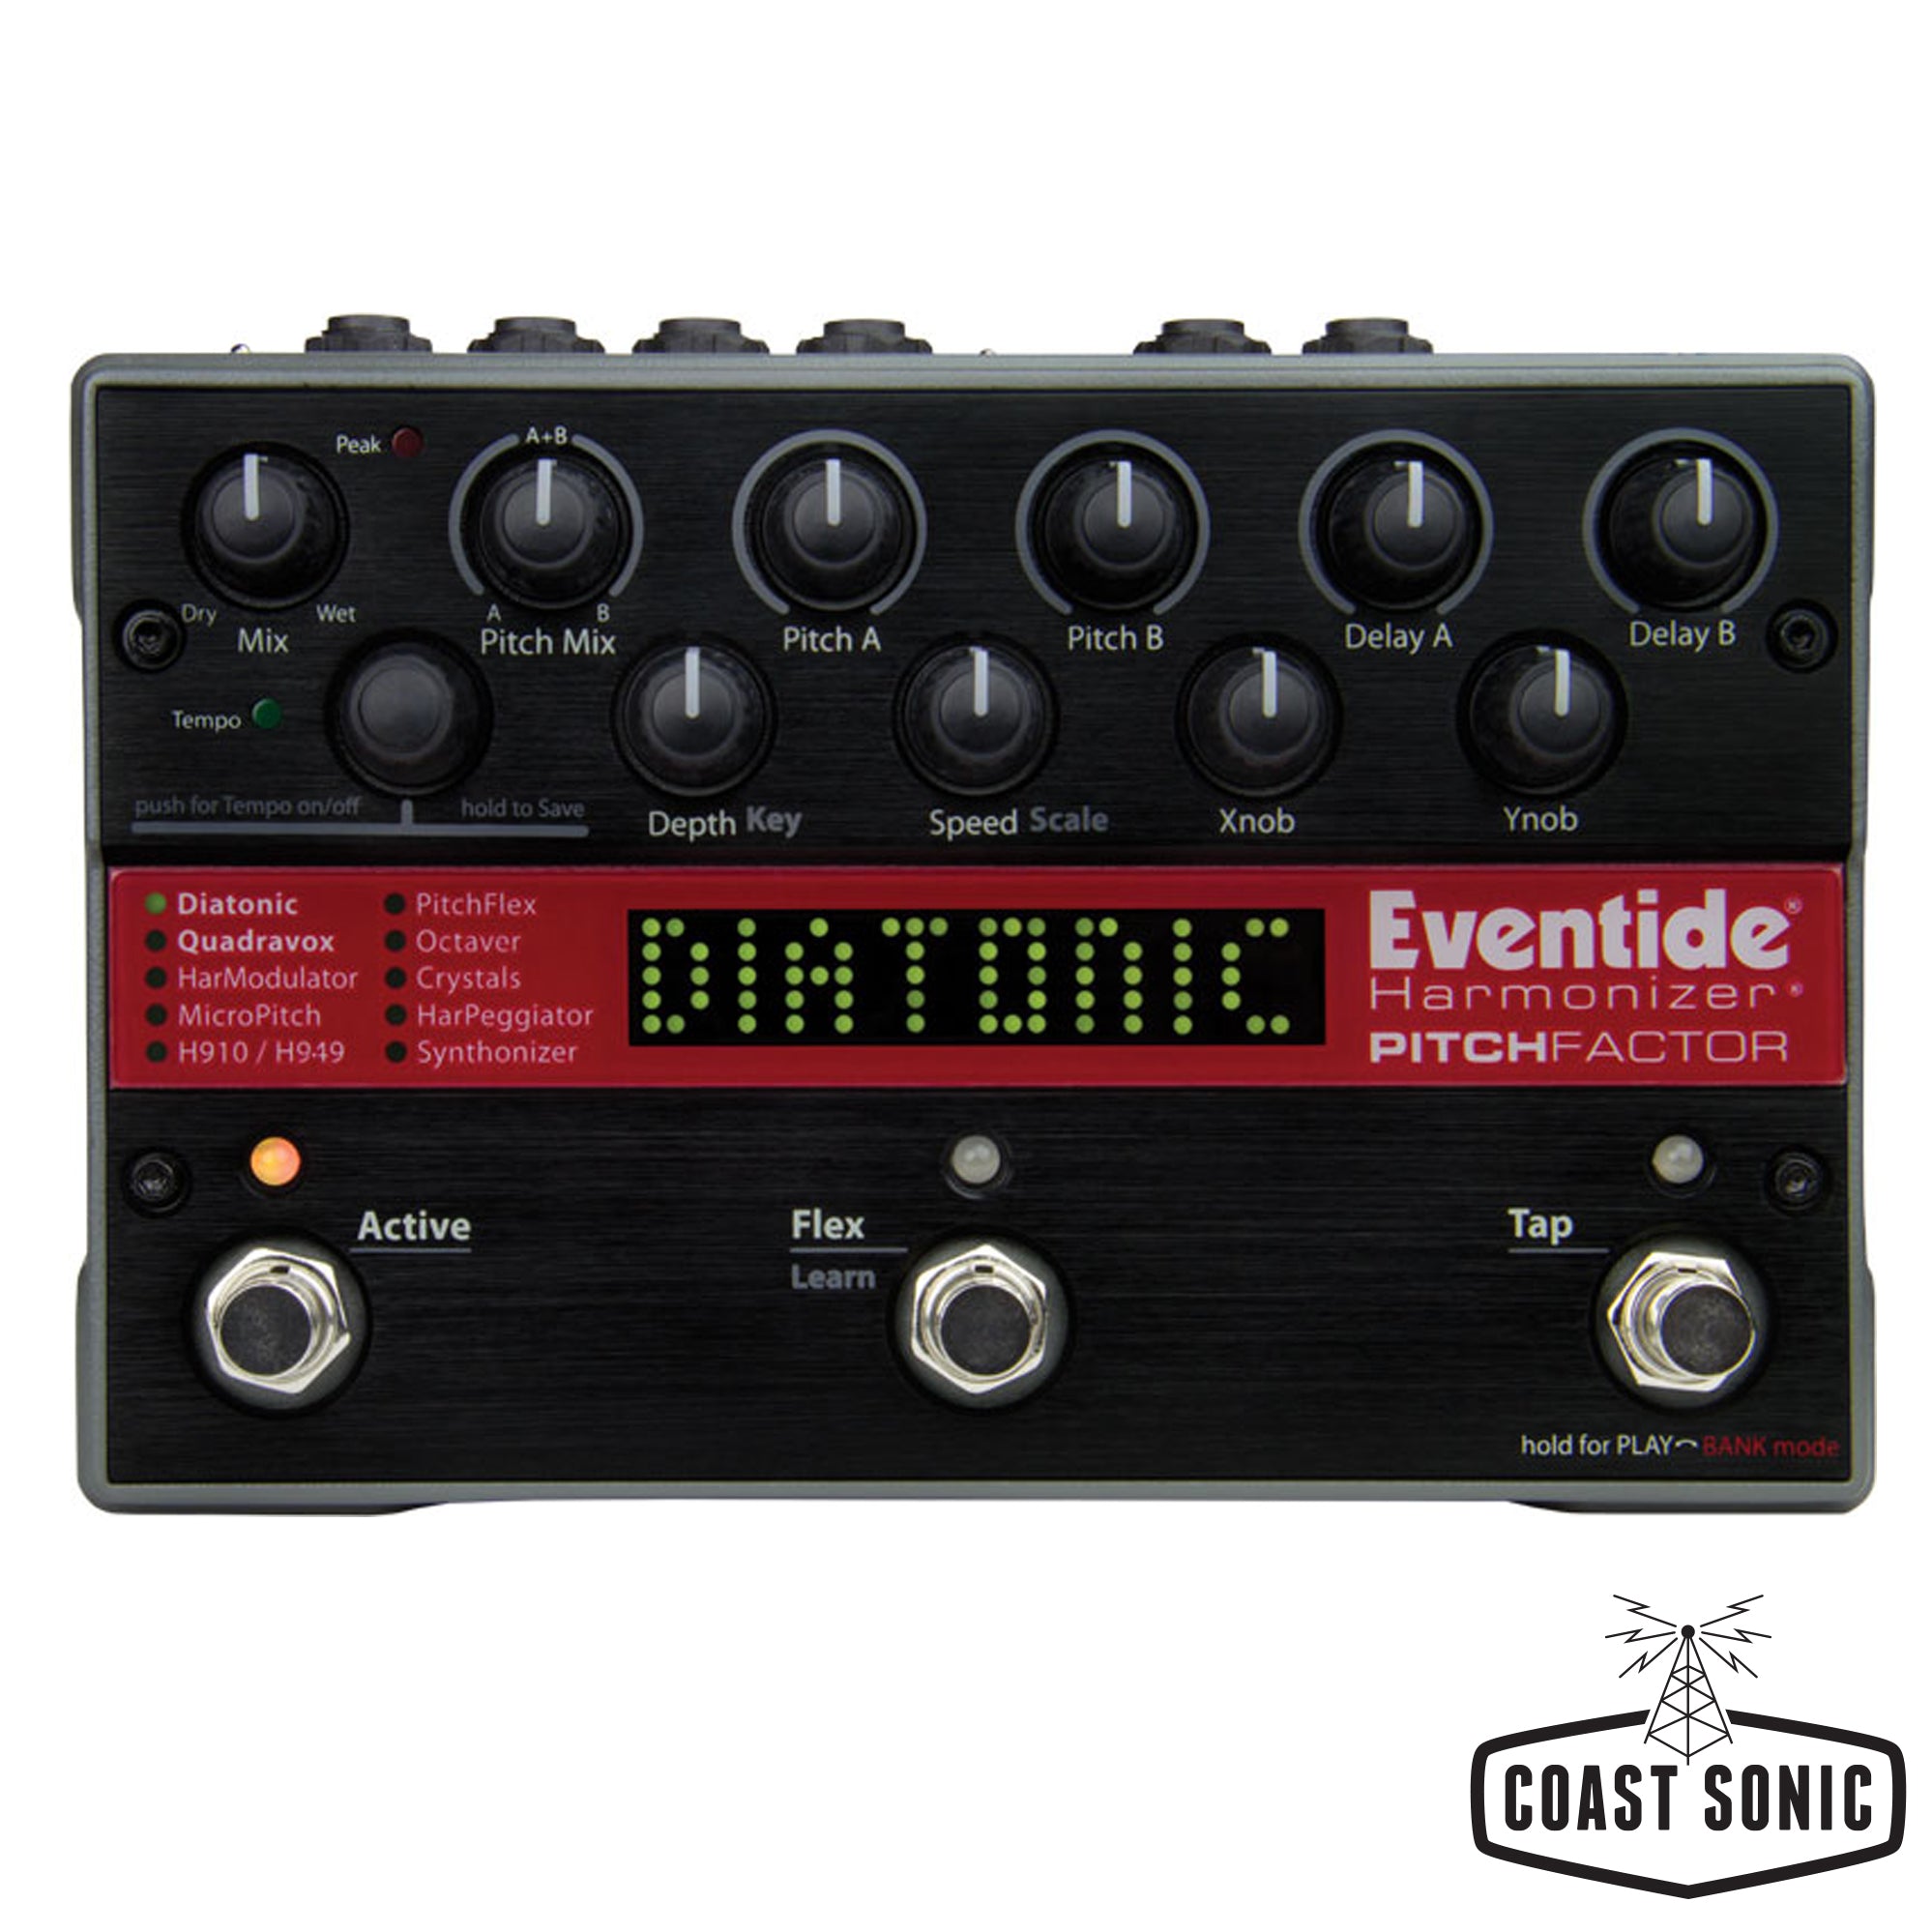 Eventide PitchFactor Harmonizer with Pitch Shifting + Delay